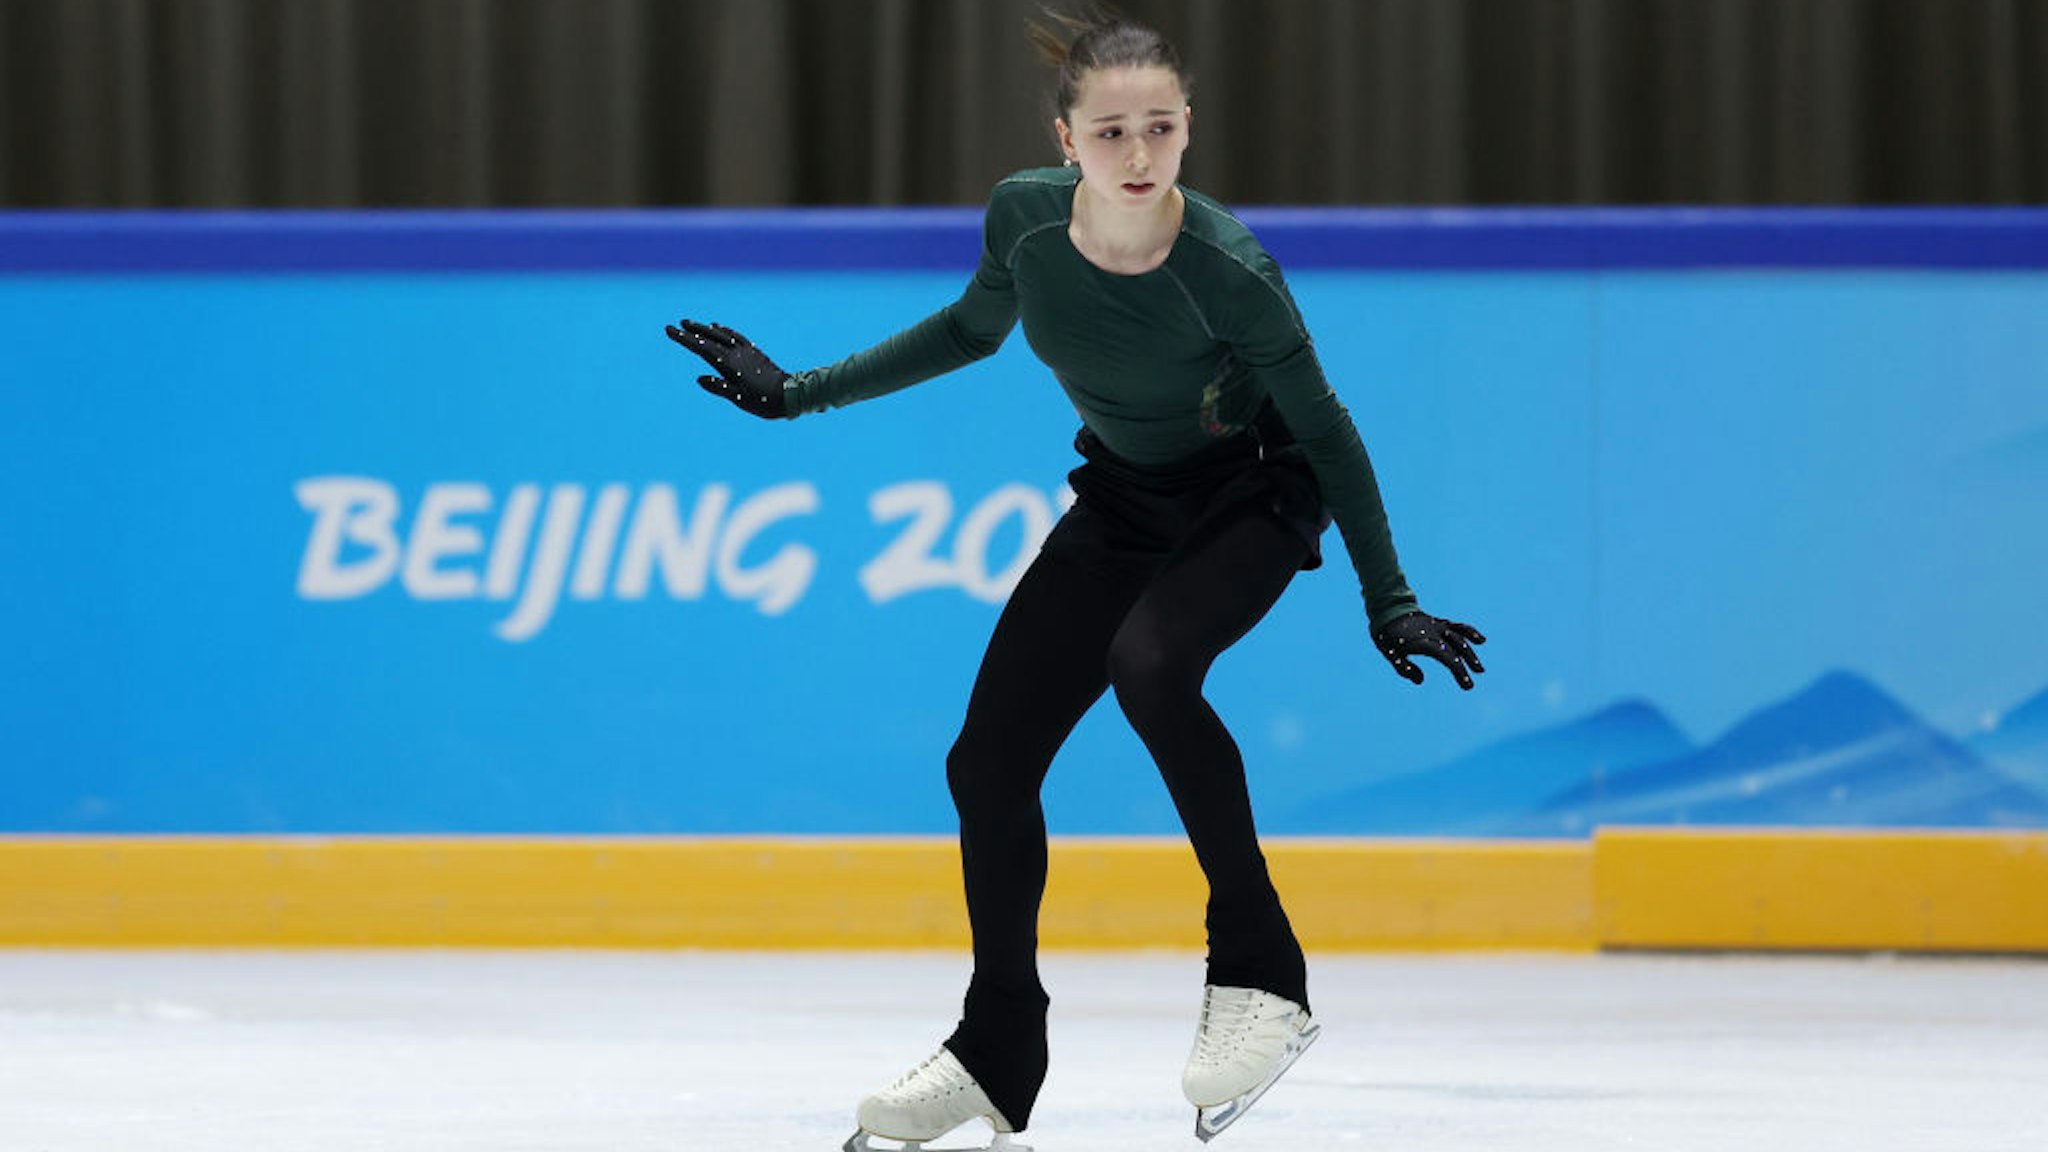 BEIJING, CHINA - FEBRUARY 14: Kamila Valieva of Team ROC skates during a training session on day ten of the Beijing 2022 Winter Olympic Games at Capital Indoor Stadium practice rink on February 14, 2022 in Beijing, China. (Photo by Matthew Stockman/Getty Images)